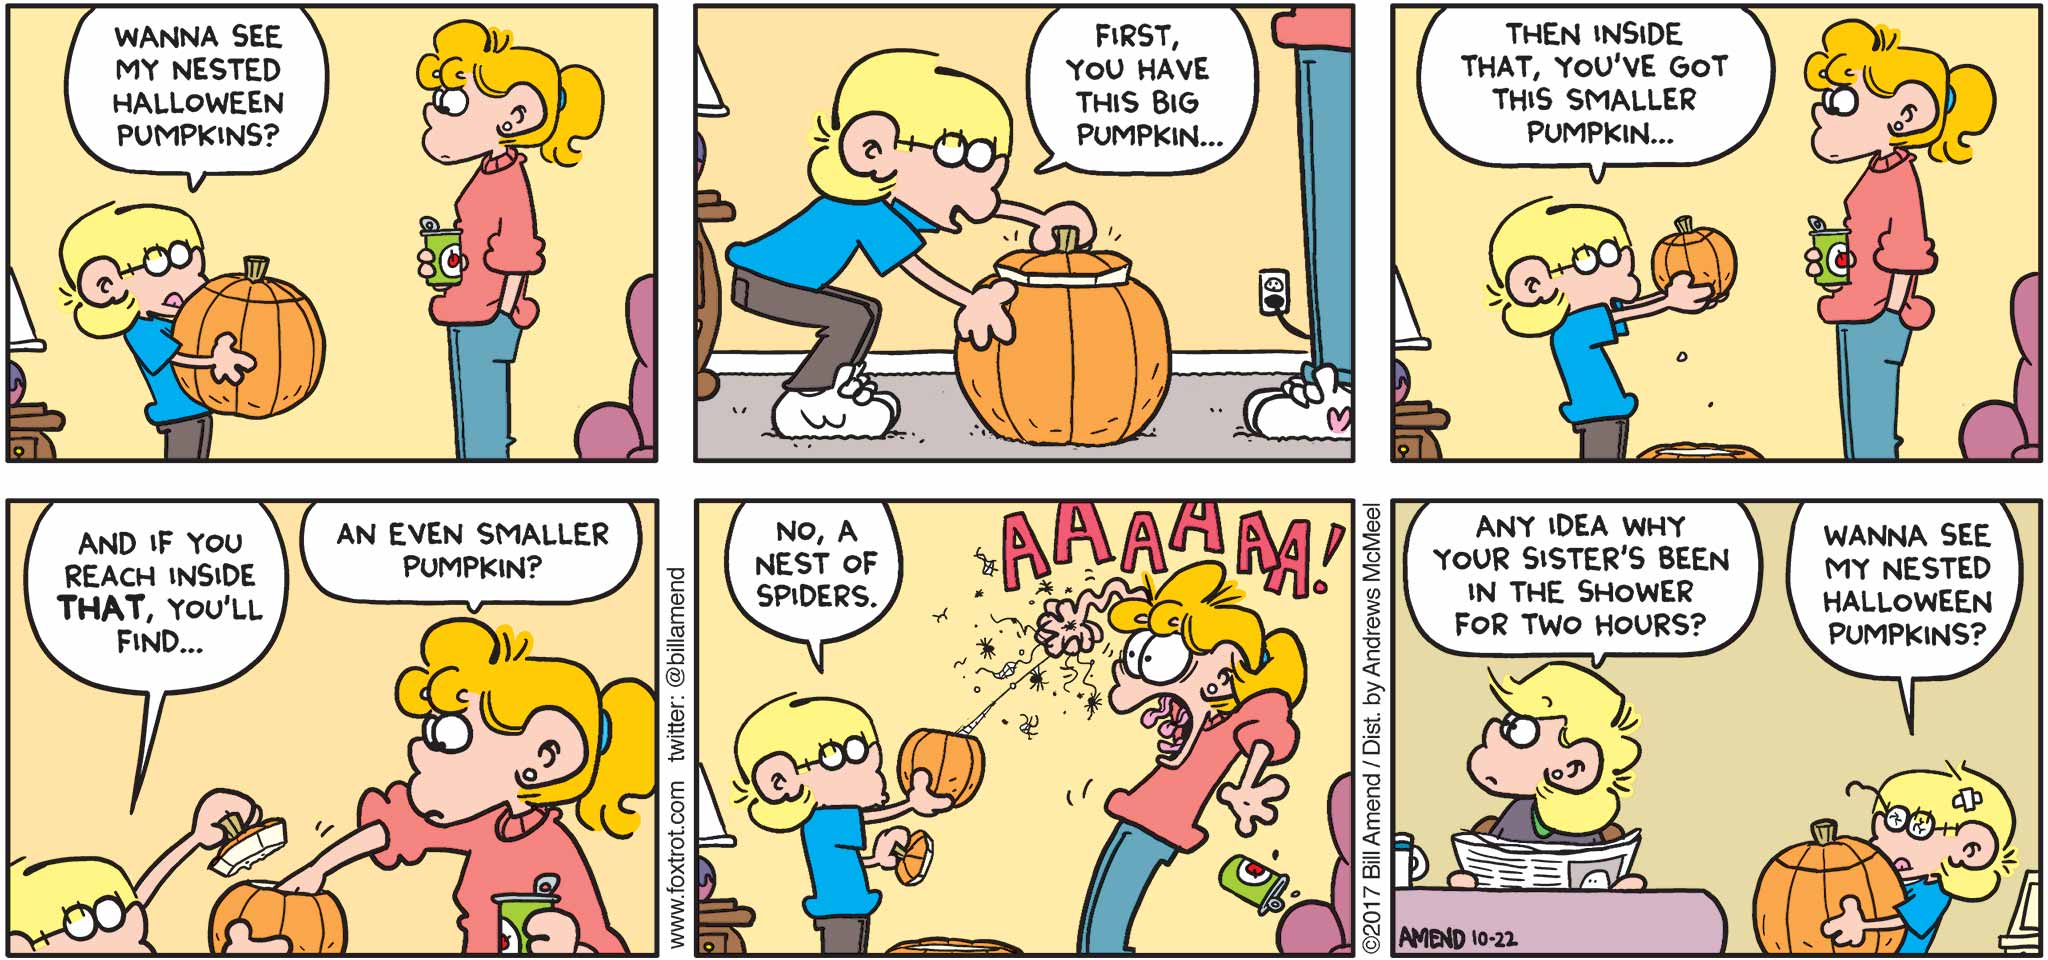 FoxTrot by Bill Amend - "Nested Pumpkins" published October 22, 2017 - Jason says: Wanna see my nested Halloween pumpkins? First, you have this big pumpkin... Then inside that, you've got a smaller pumpkin... And if you reach in side that, you'll find... Paige says: An even smaller pumpkin? Jason says: No, a nest of spiders. Paige screams: AAAAA! Andy says: Any idea why your sister's been in the shower for two hours? Jason says: Wanna see my nested Halloween pumpkins?